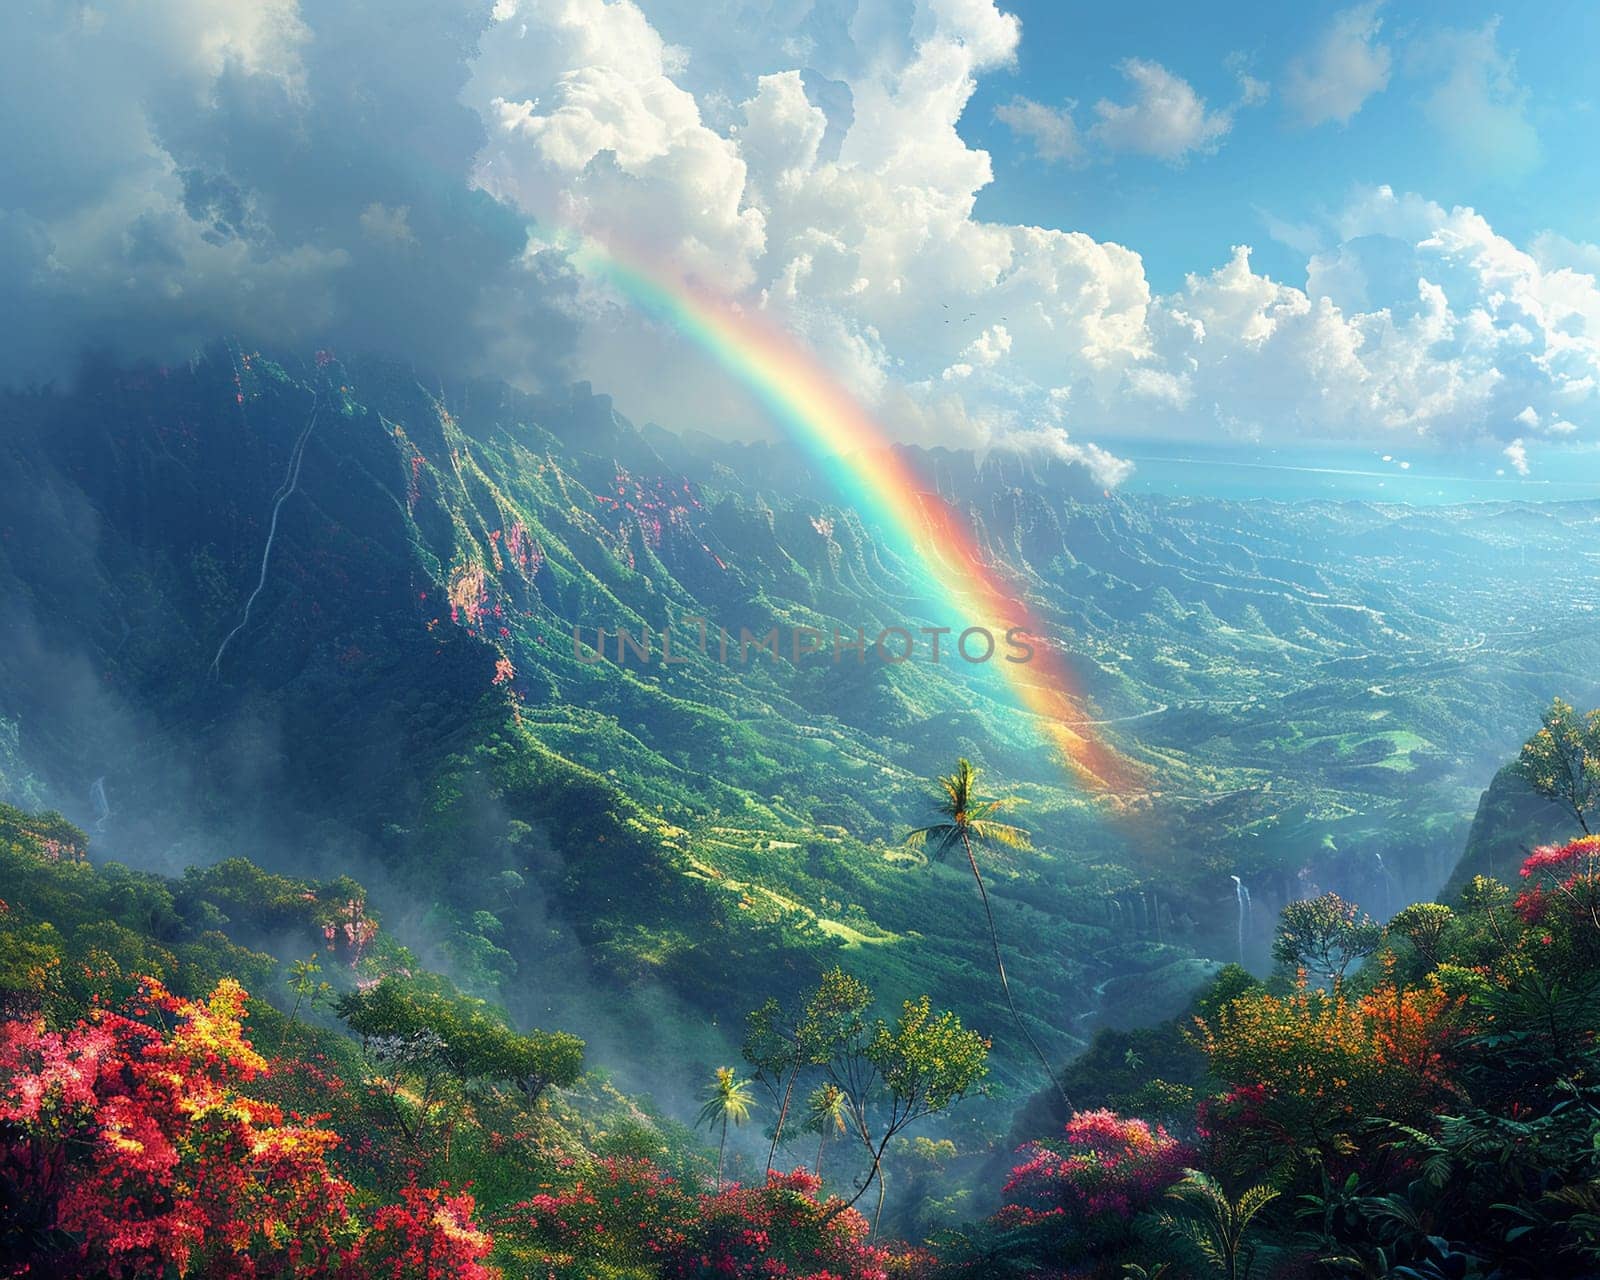 Rainbow appearing over a lush valley, capturing beauty and natural wonder.